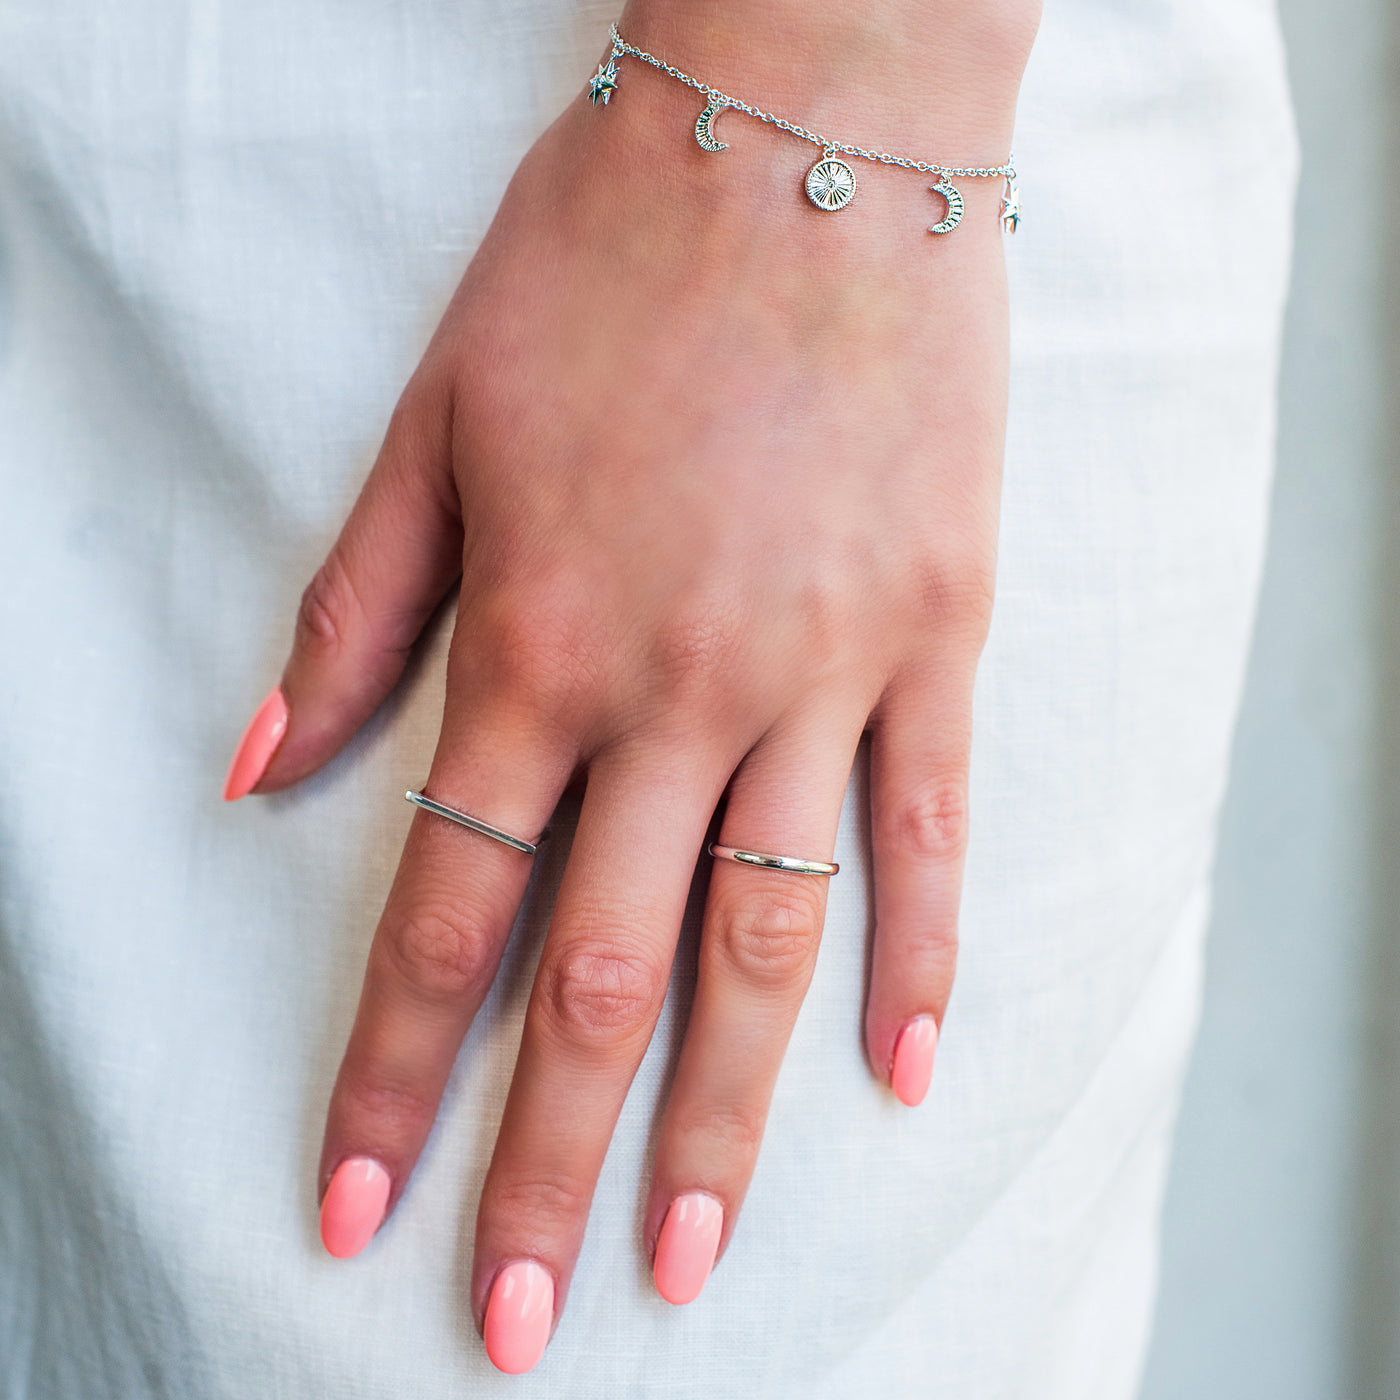 Model wearing sterling silver horseshoe shaped minimal plain ring and other ring band with moon and star charm bracelet